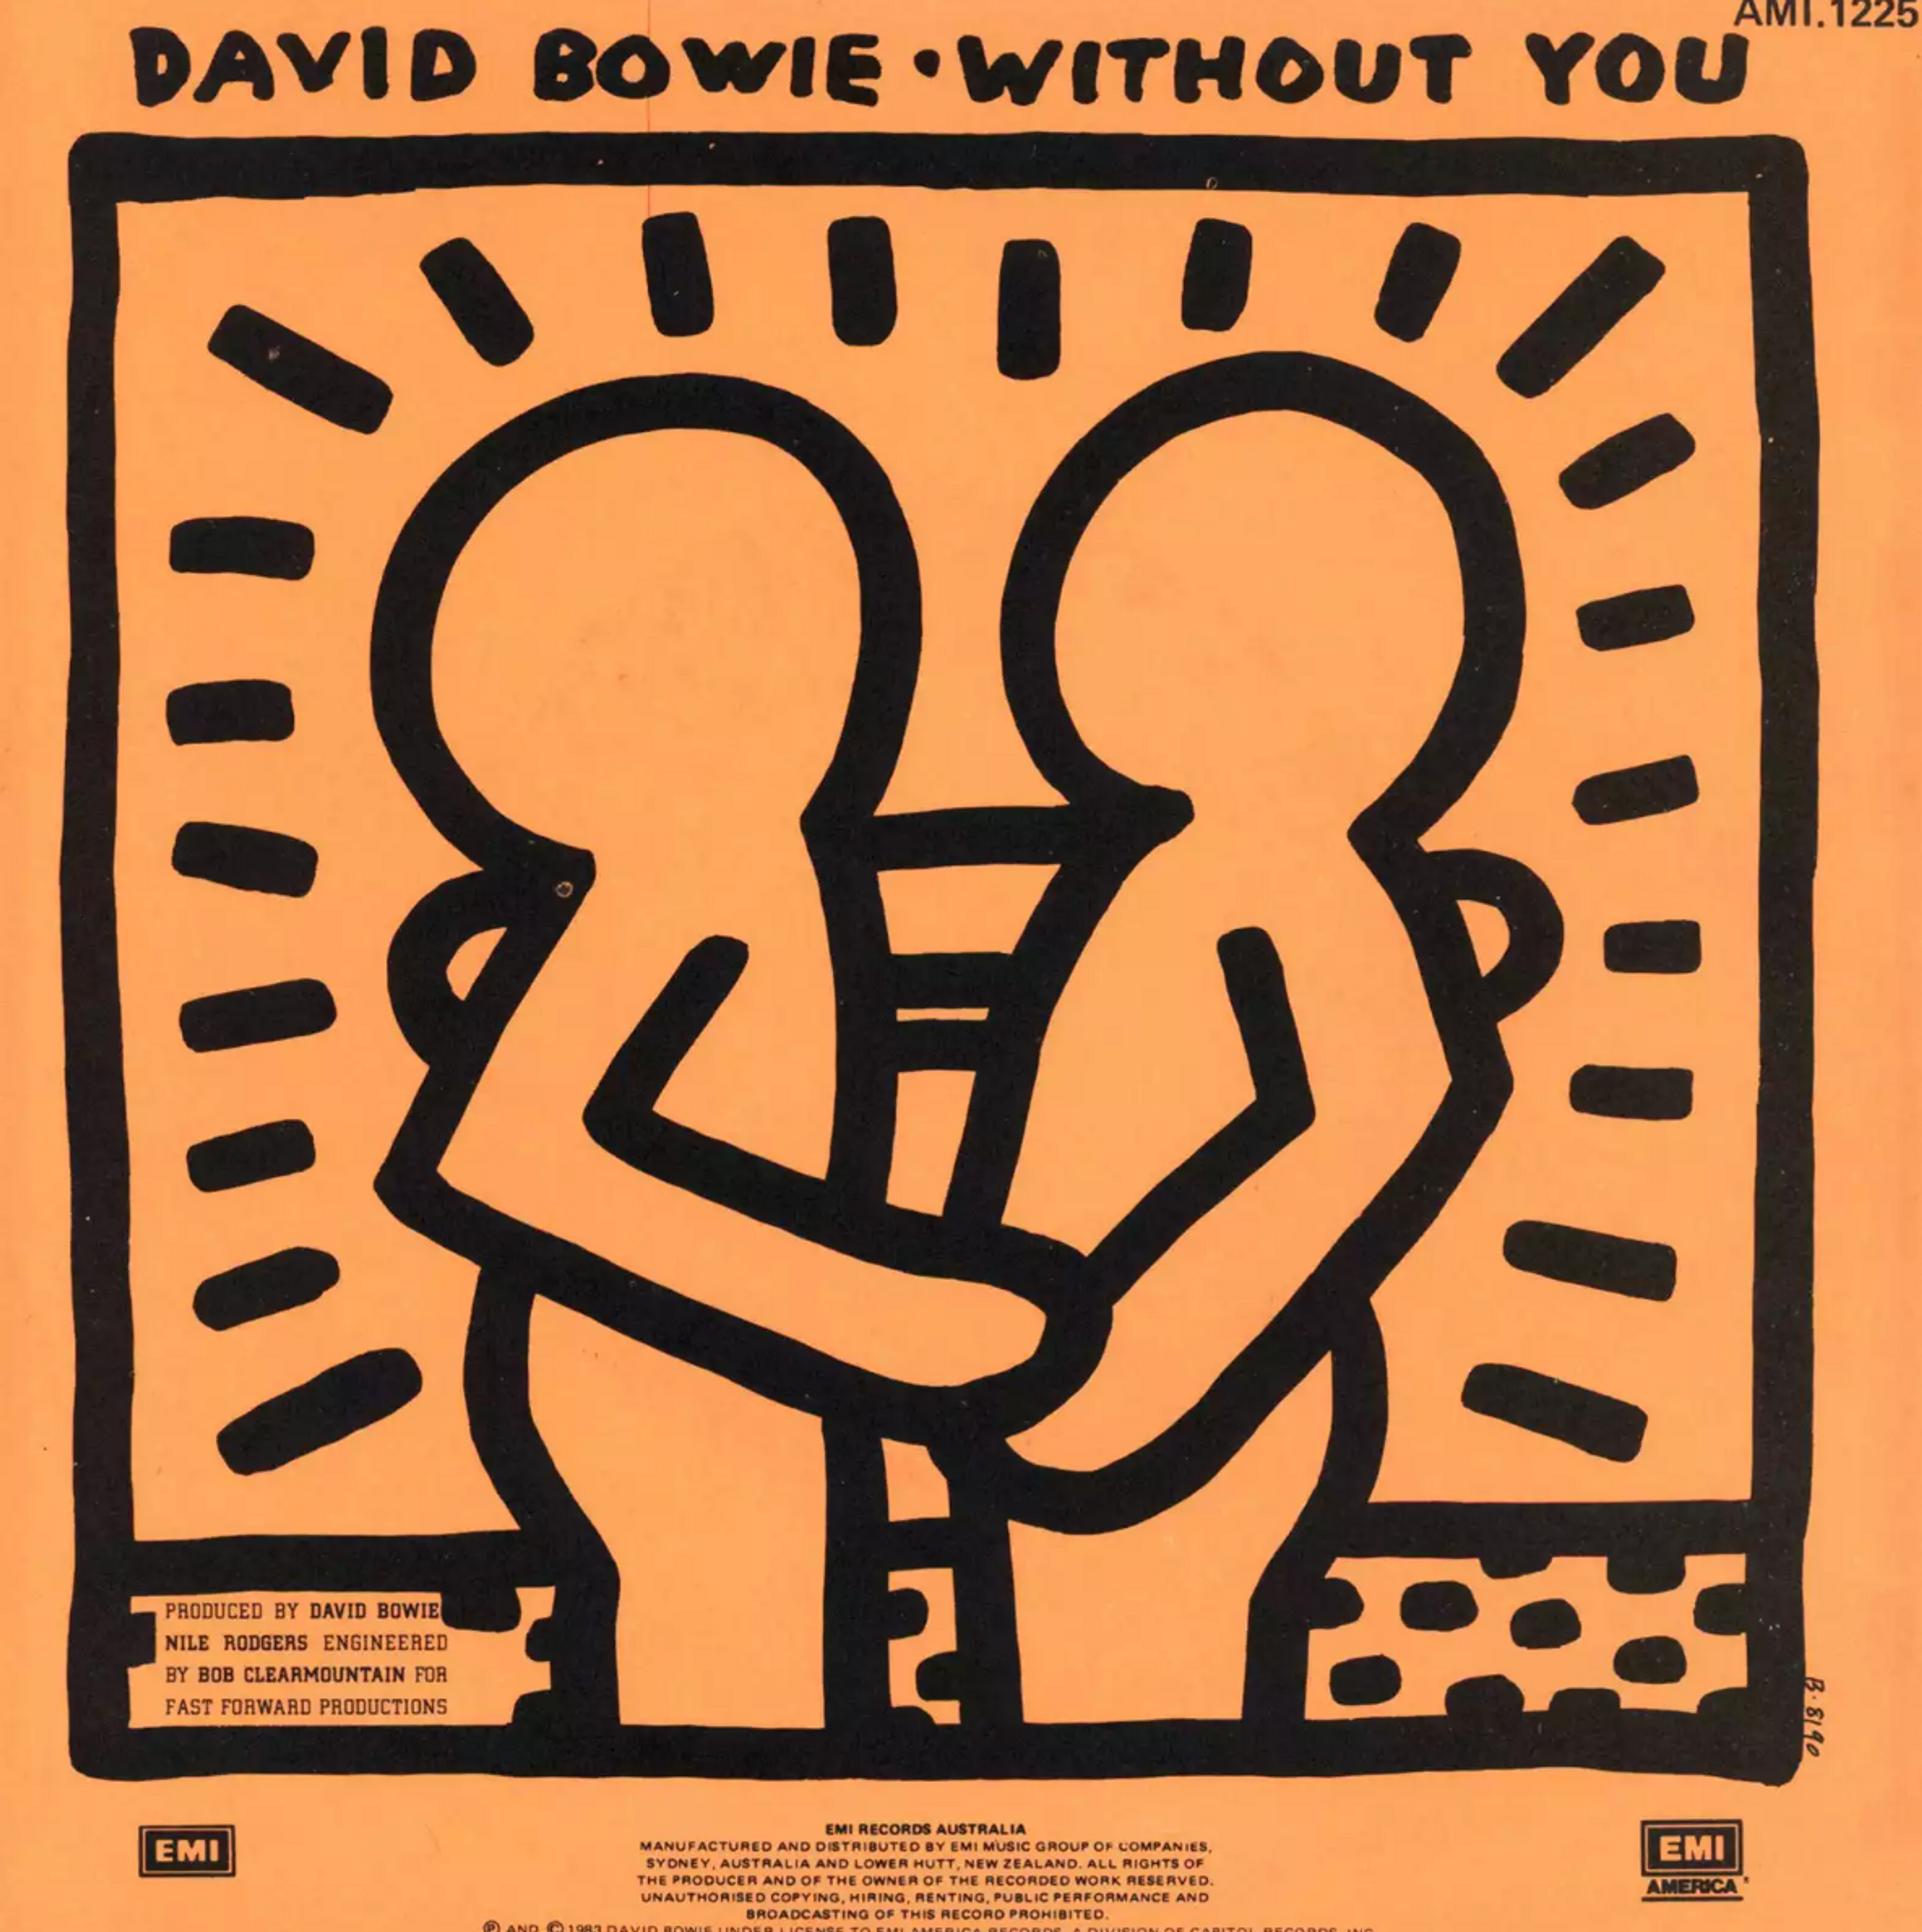 Without You by David Bowie